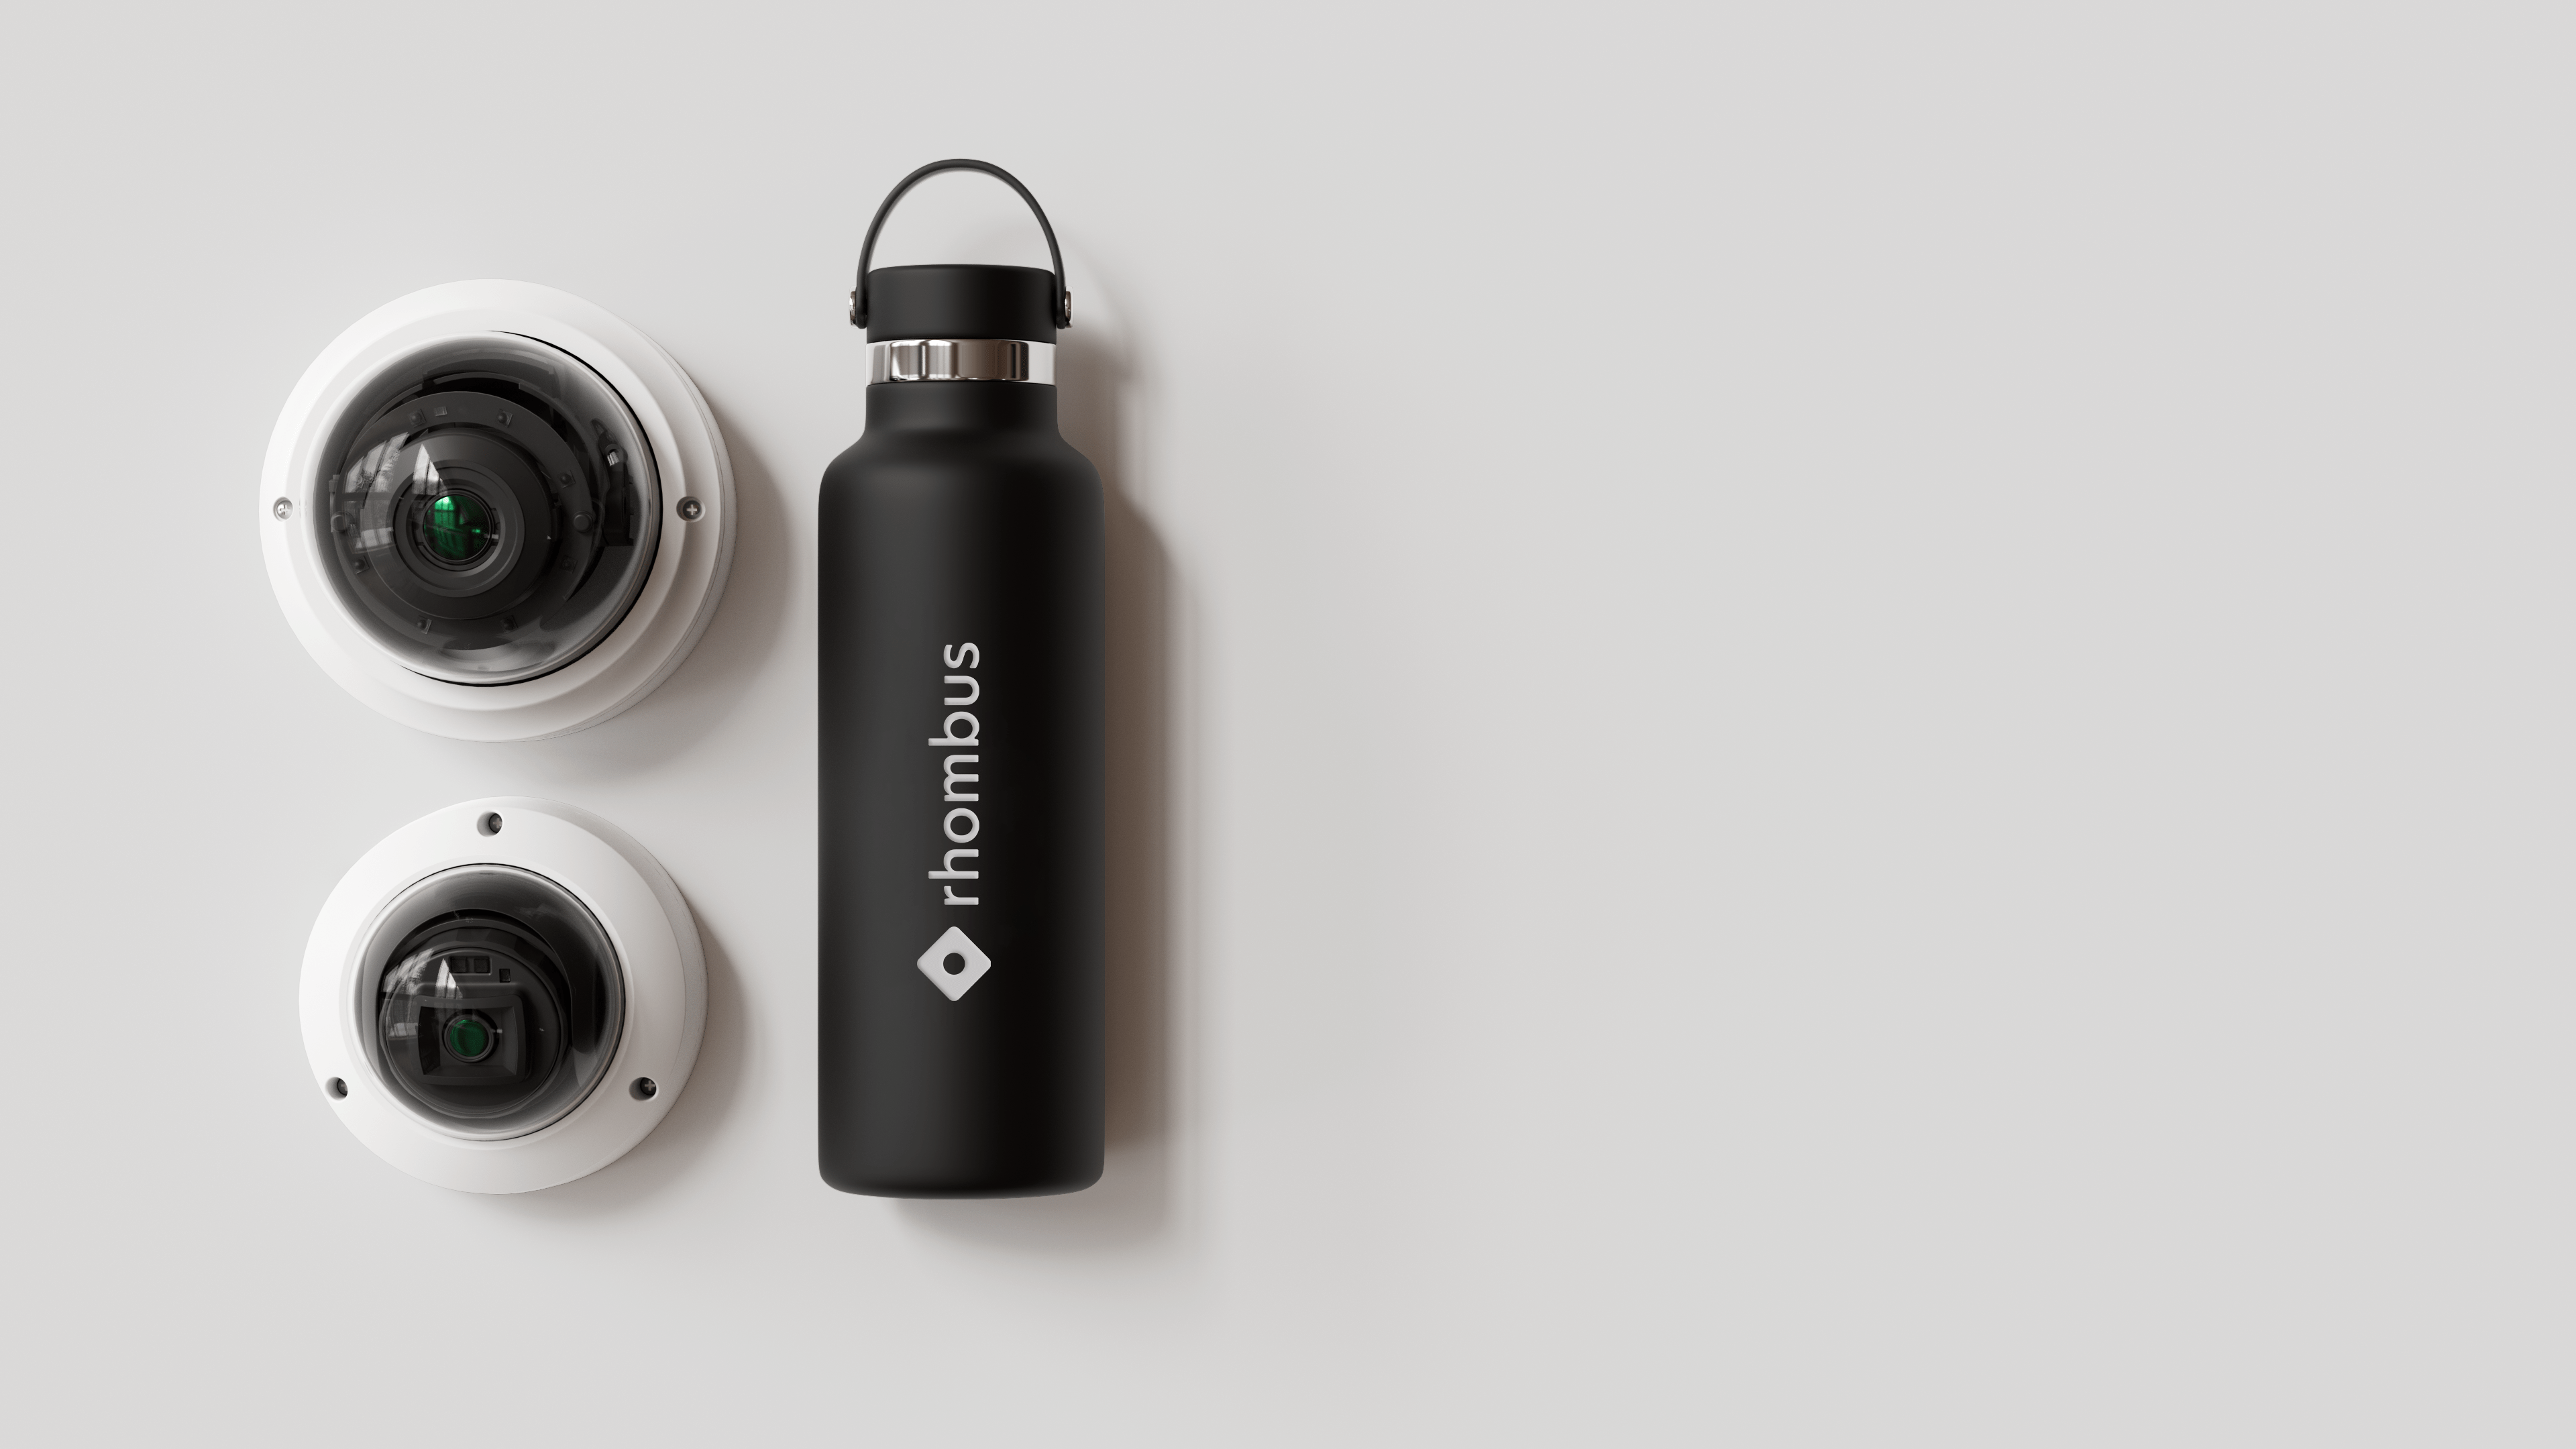 Rhombus cameras next to a Hydroflask